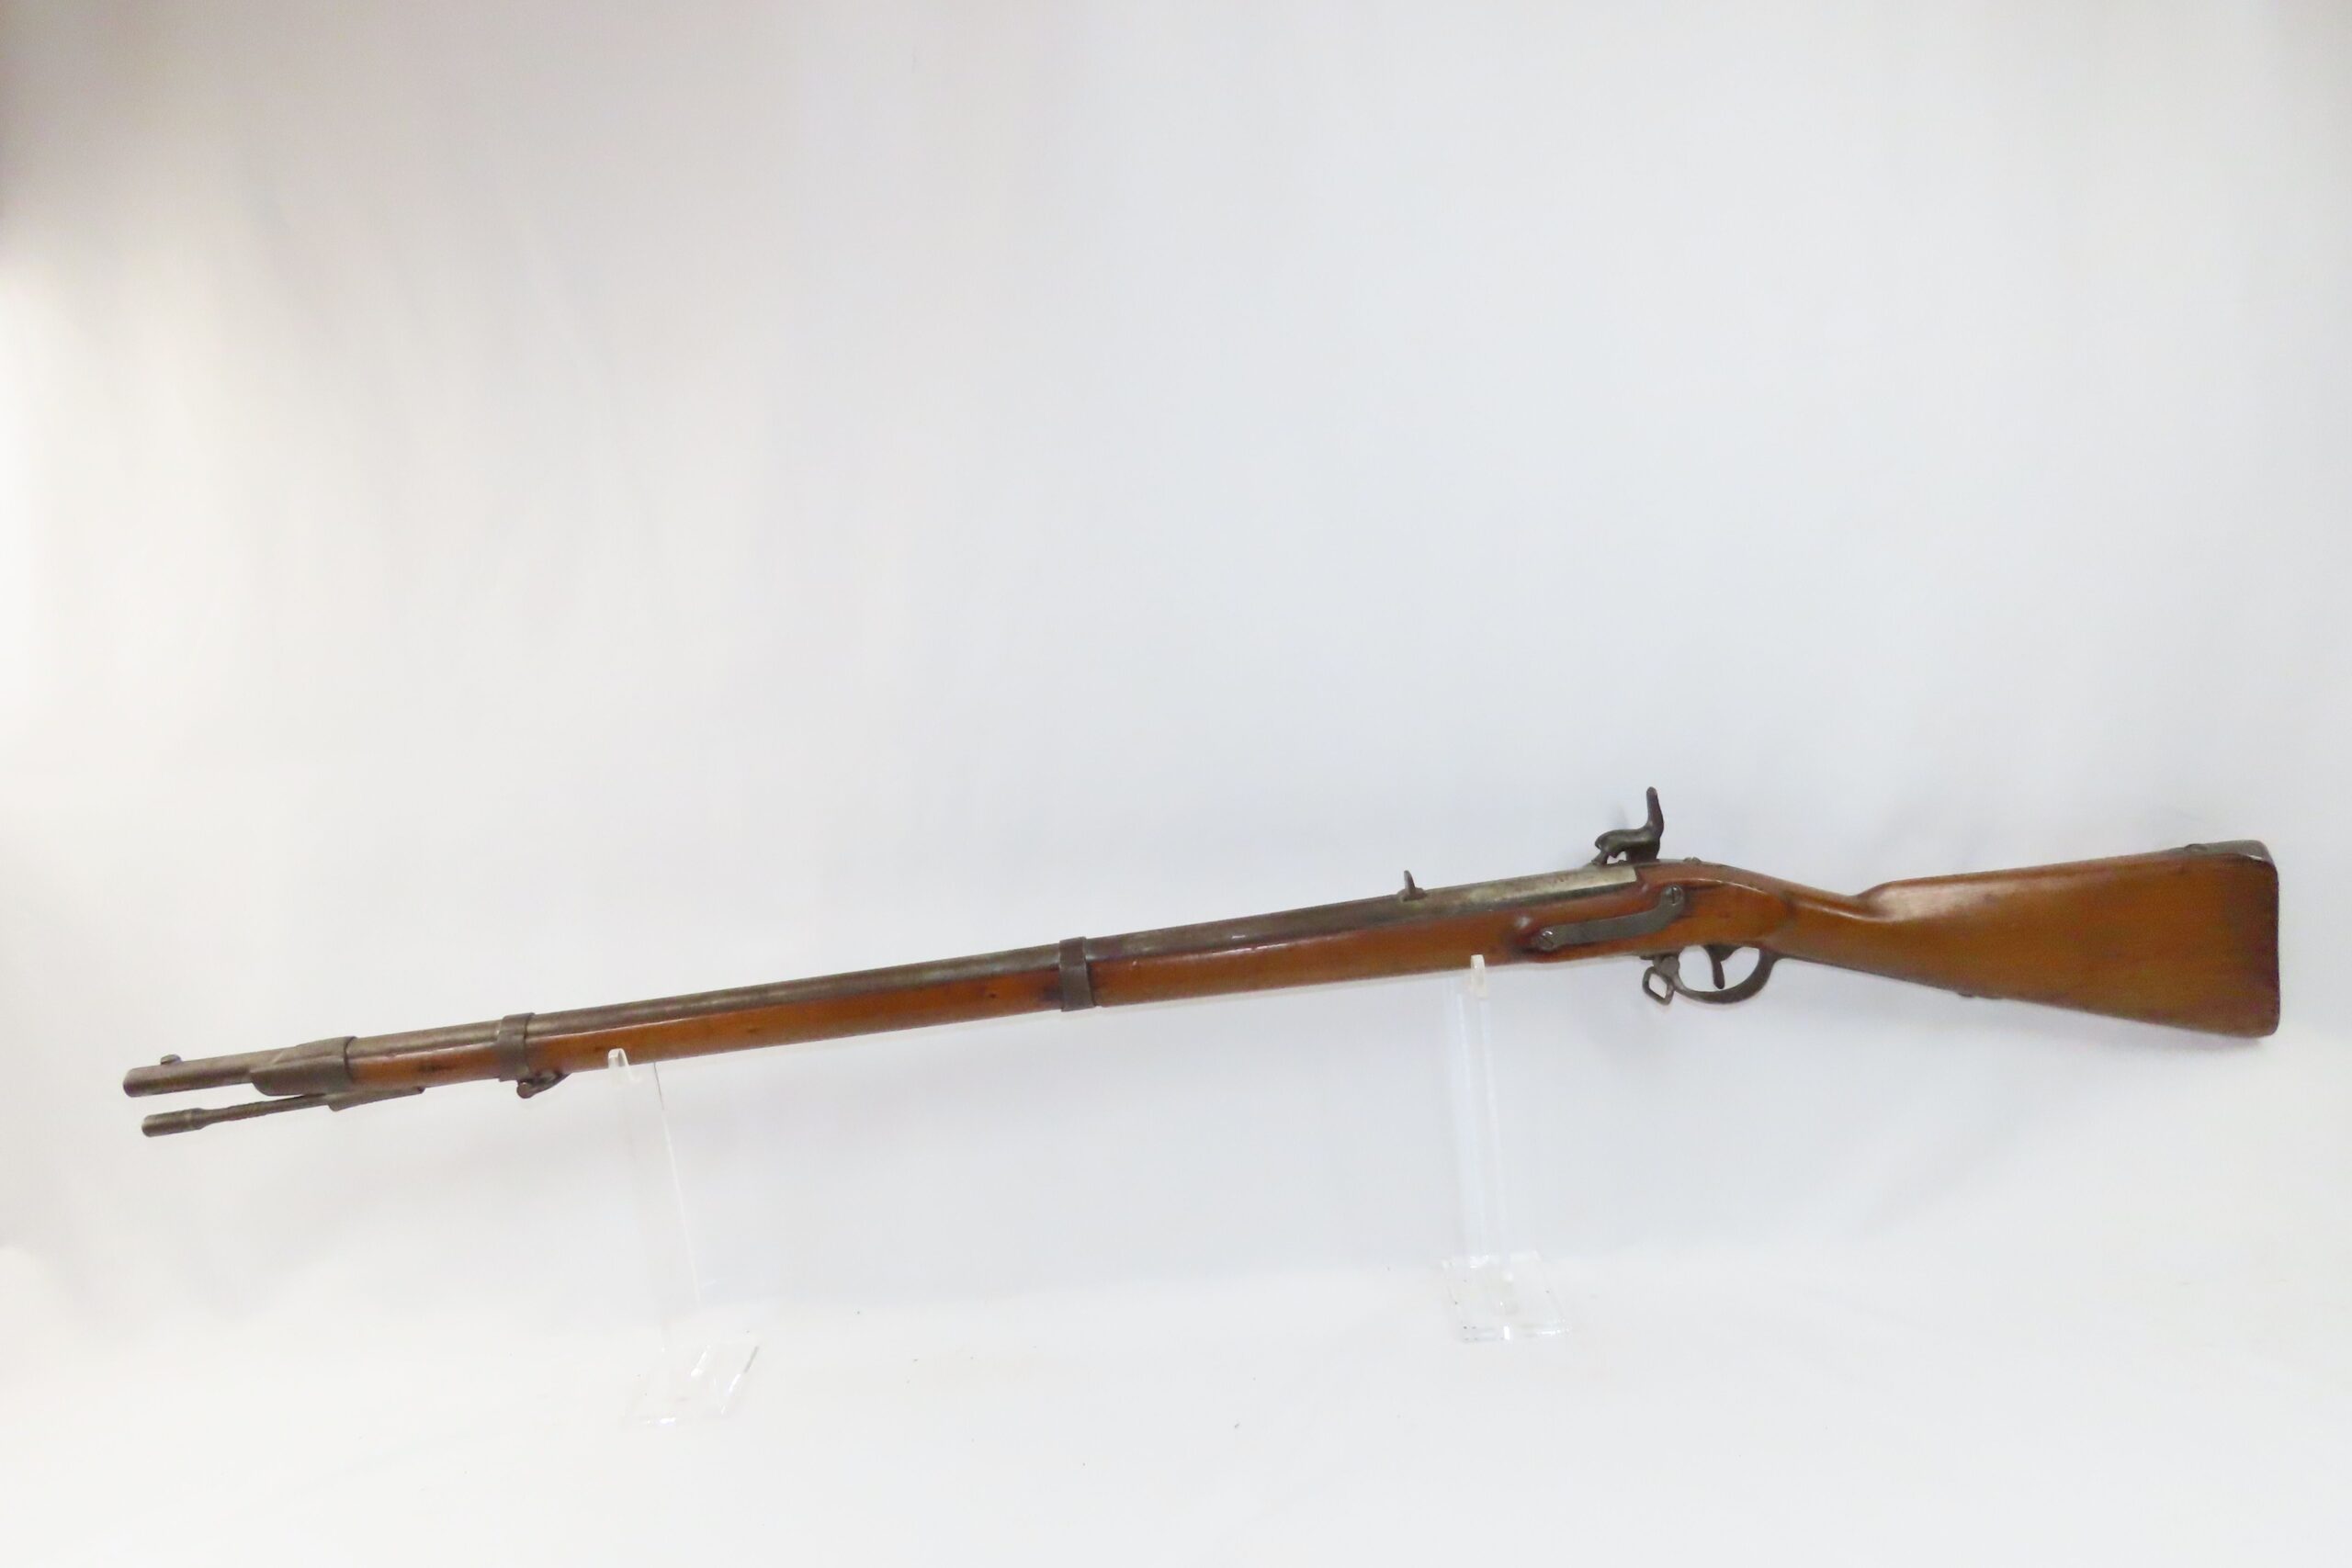 CIVIL WAR Antique AUSTRIAN Lorenz Model 1854 .60 Caliber Percussion MUSKET  Imported to Both North & South for American Civil War